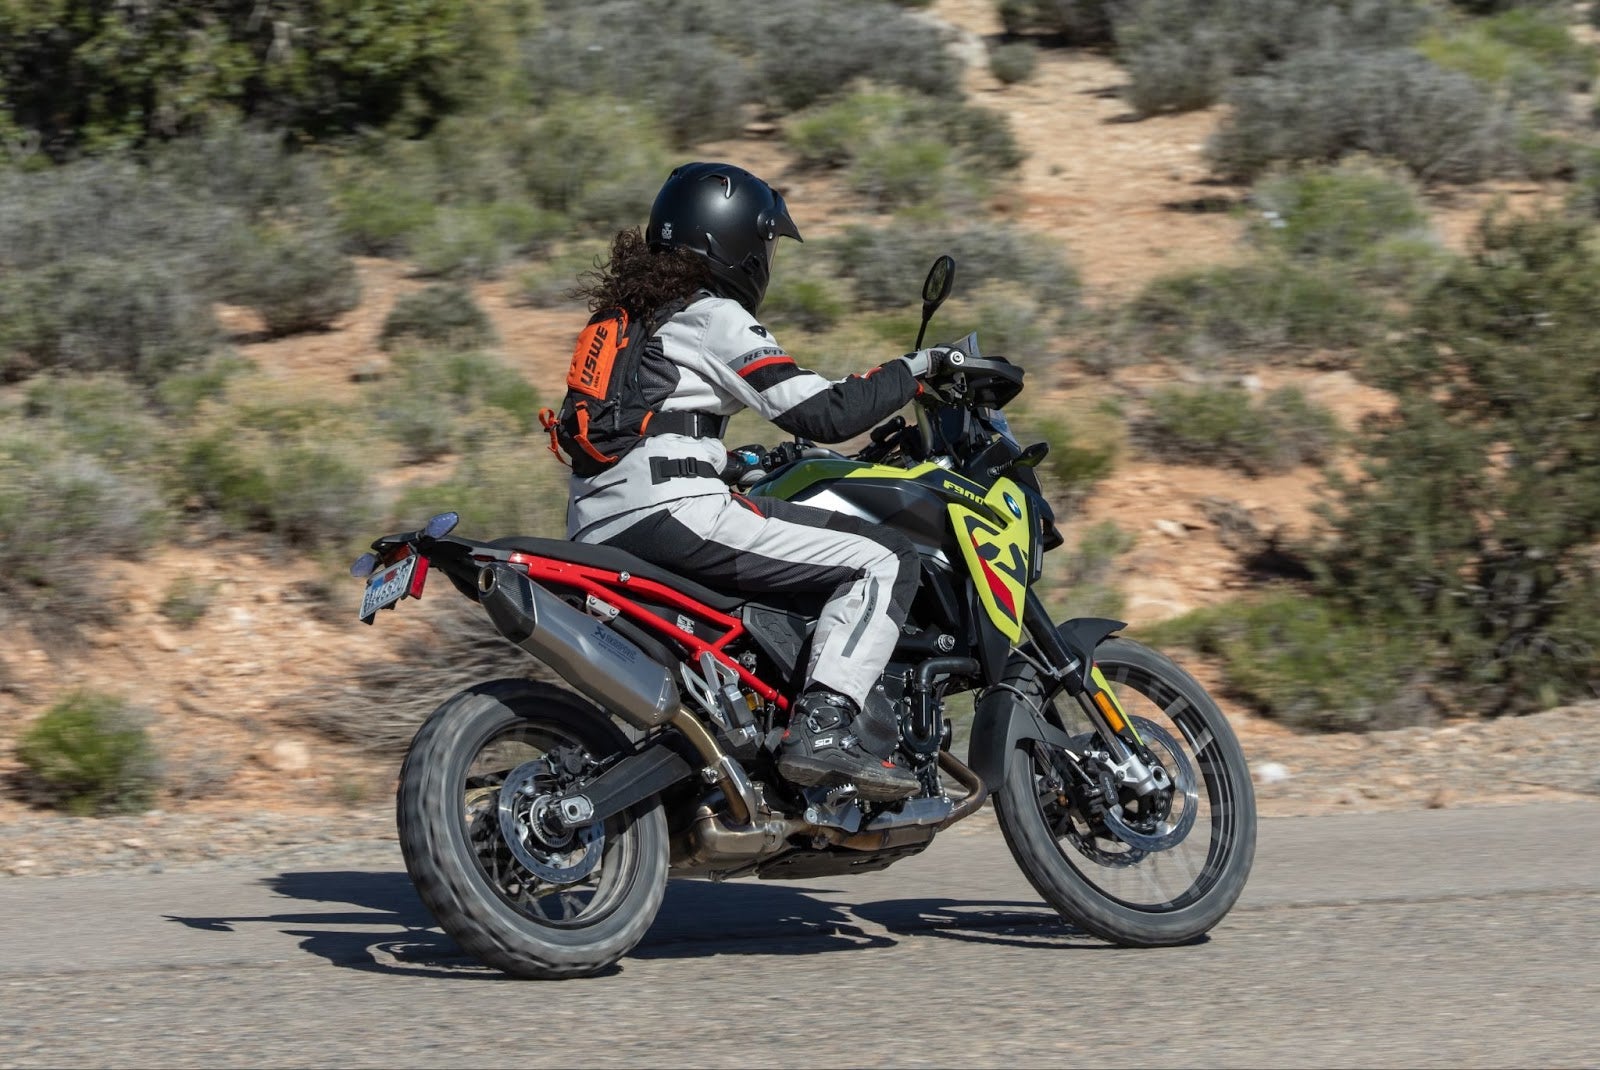 Image for the article entitled “The 2024 BMW F900GS no longer has any worlds to conquer”.